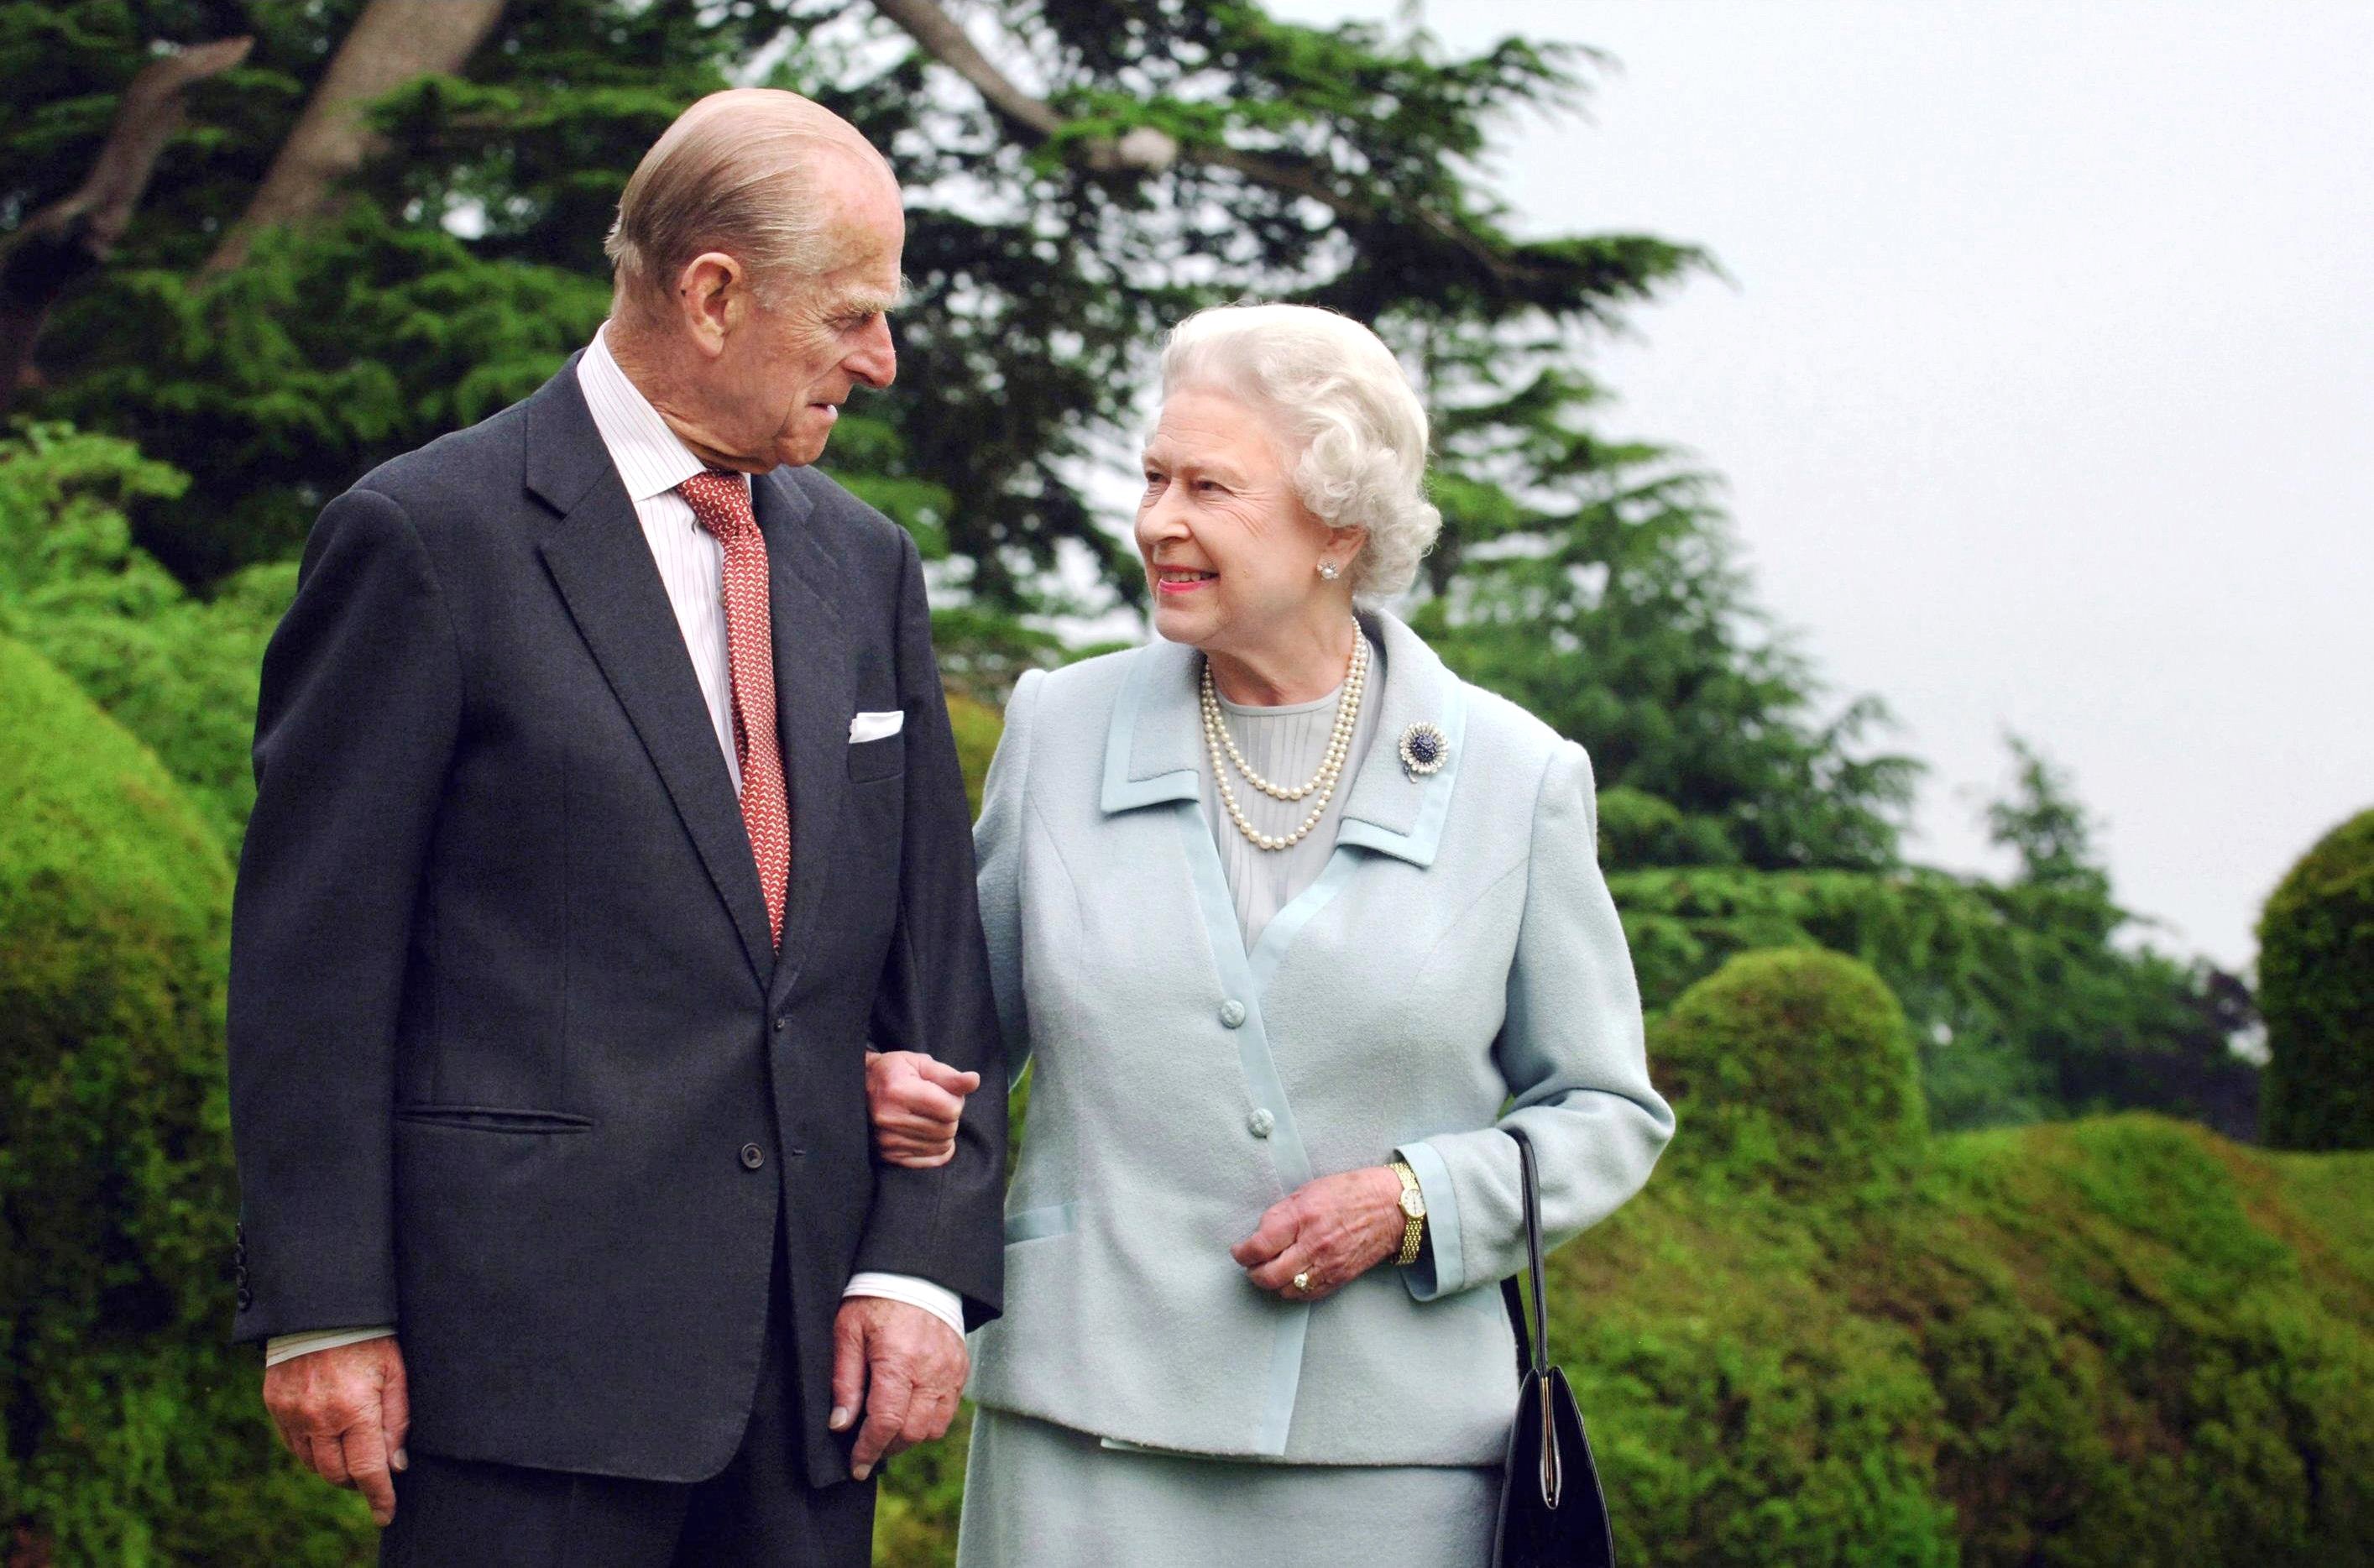 Queen Elizabeth II and Prince Philip walking arm in arm to mark their diamond wedding anniversary